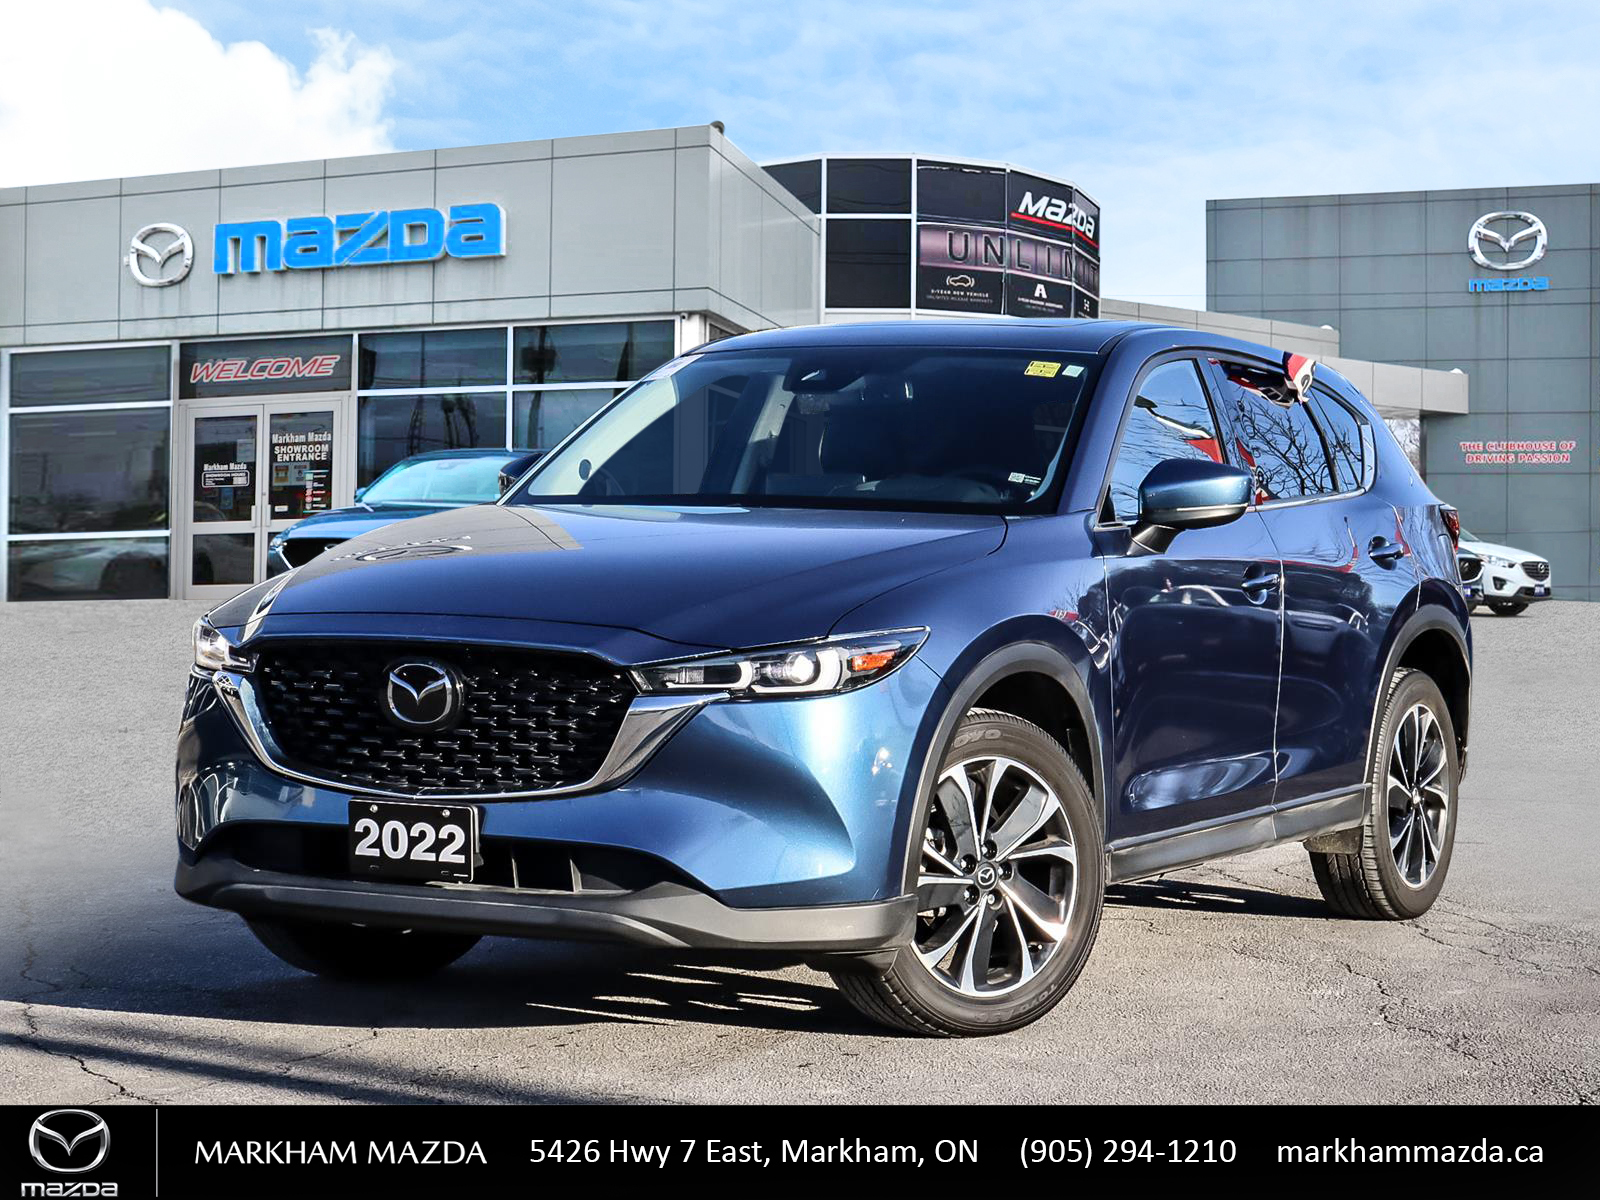 2022 Mazda CX-5 GT AWD Certified Preowned Finance 5.75%